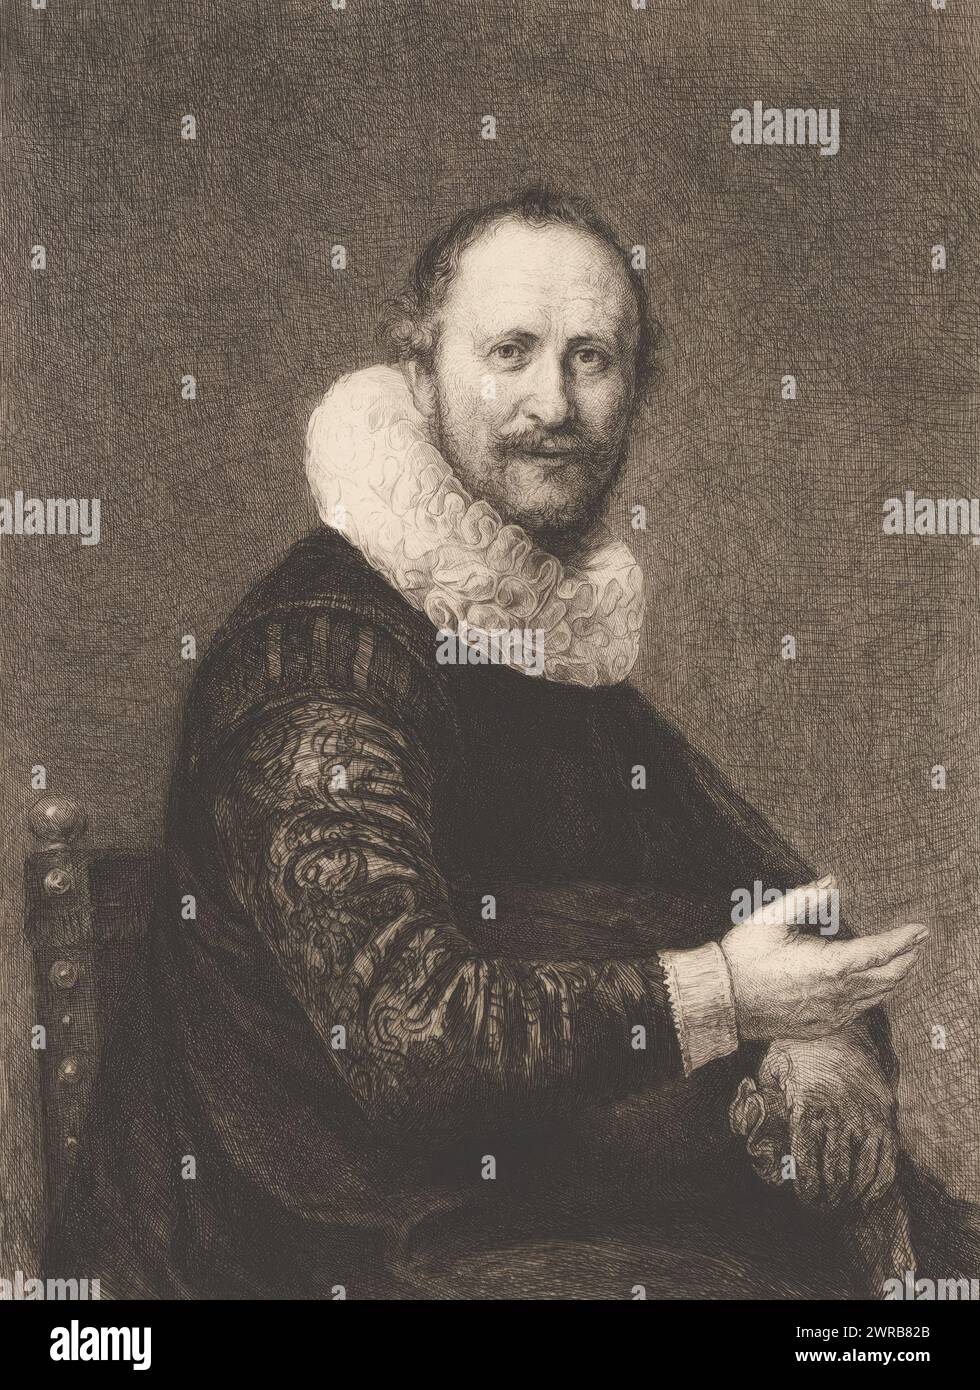 Portrait of an unknown man on a chair, Männliches Bildnis (title on object), print maker: William Unger, after painting by: Rembrandt van Rijn, printer: A. Pisani, Vienna, 1861 - 1889, paper, etching, height 318 mm × width 236 mm, print Stock Photo